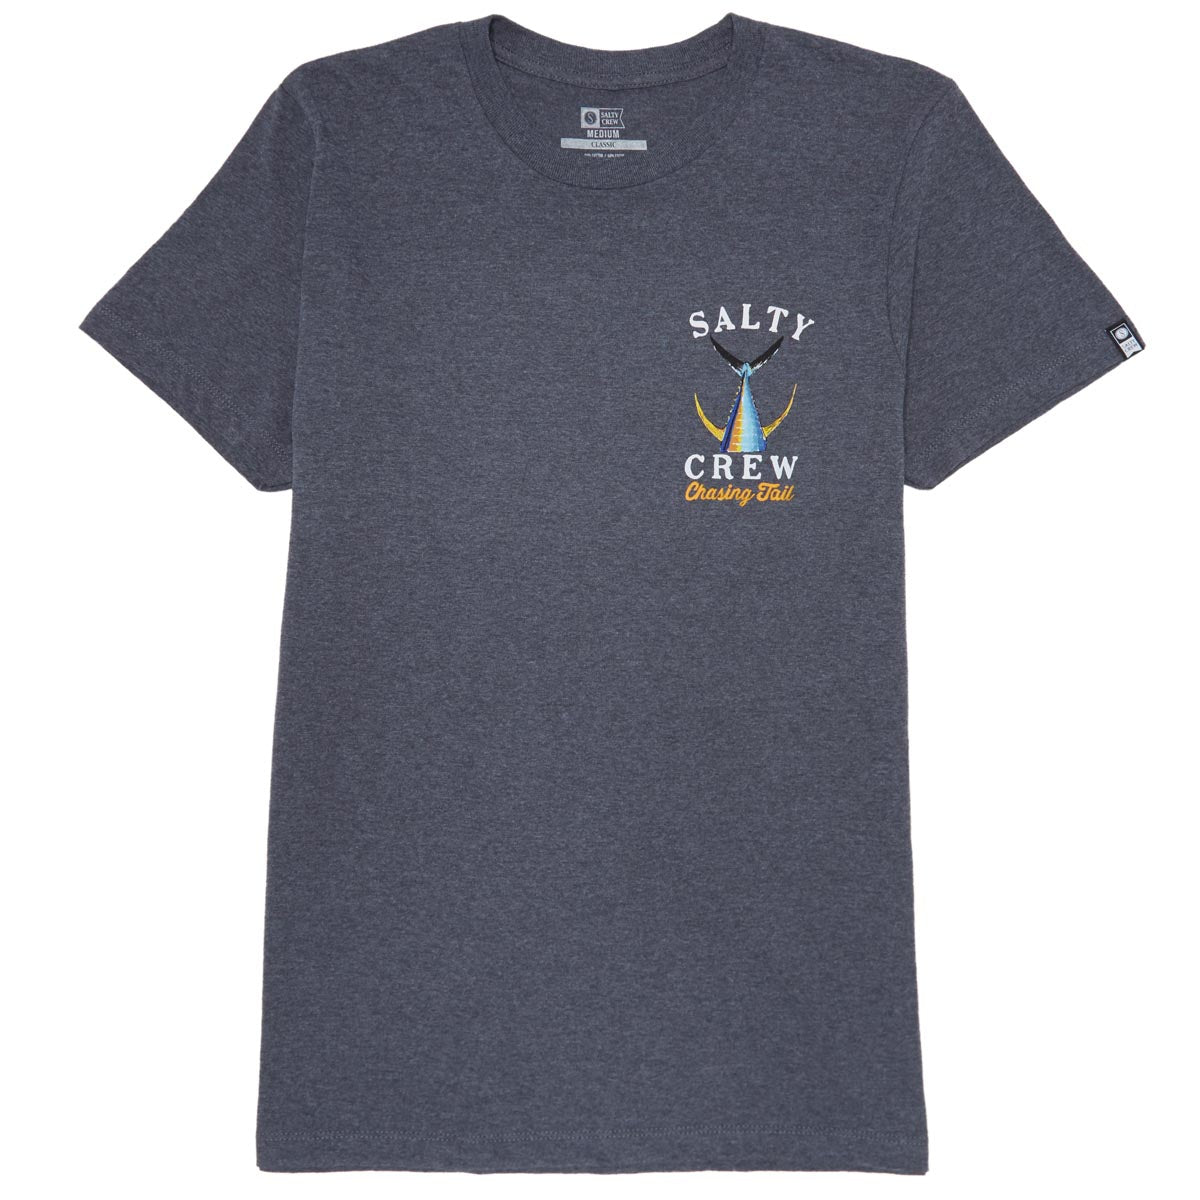 Salty Crew Tailed Classic T-Shirt - Excaliber Heather image 2